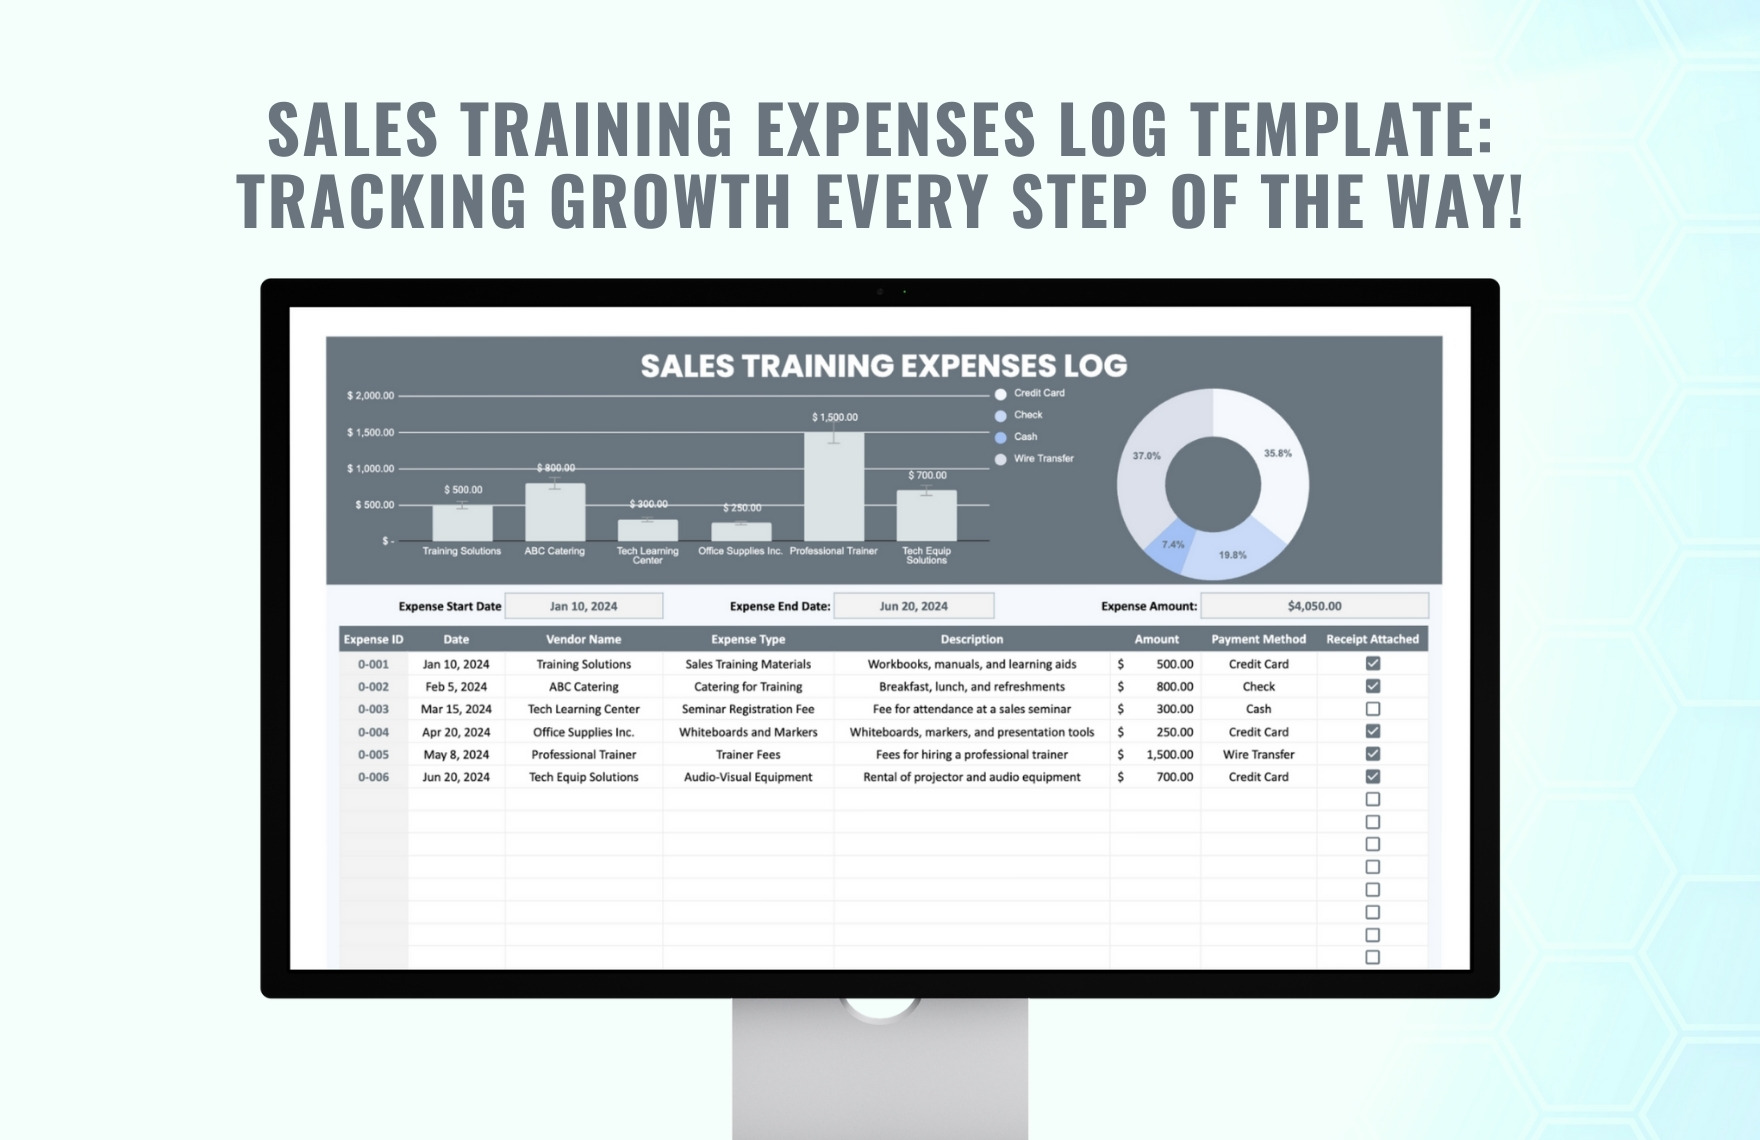 Sales Training Expenses Log Template